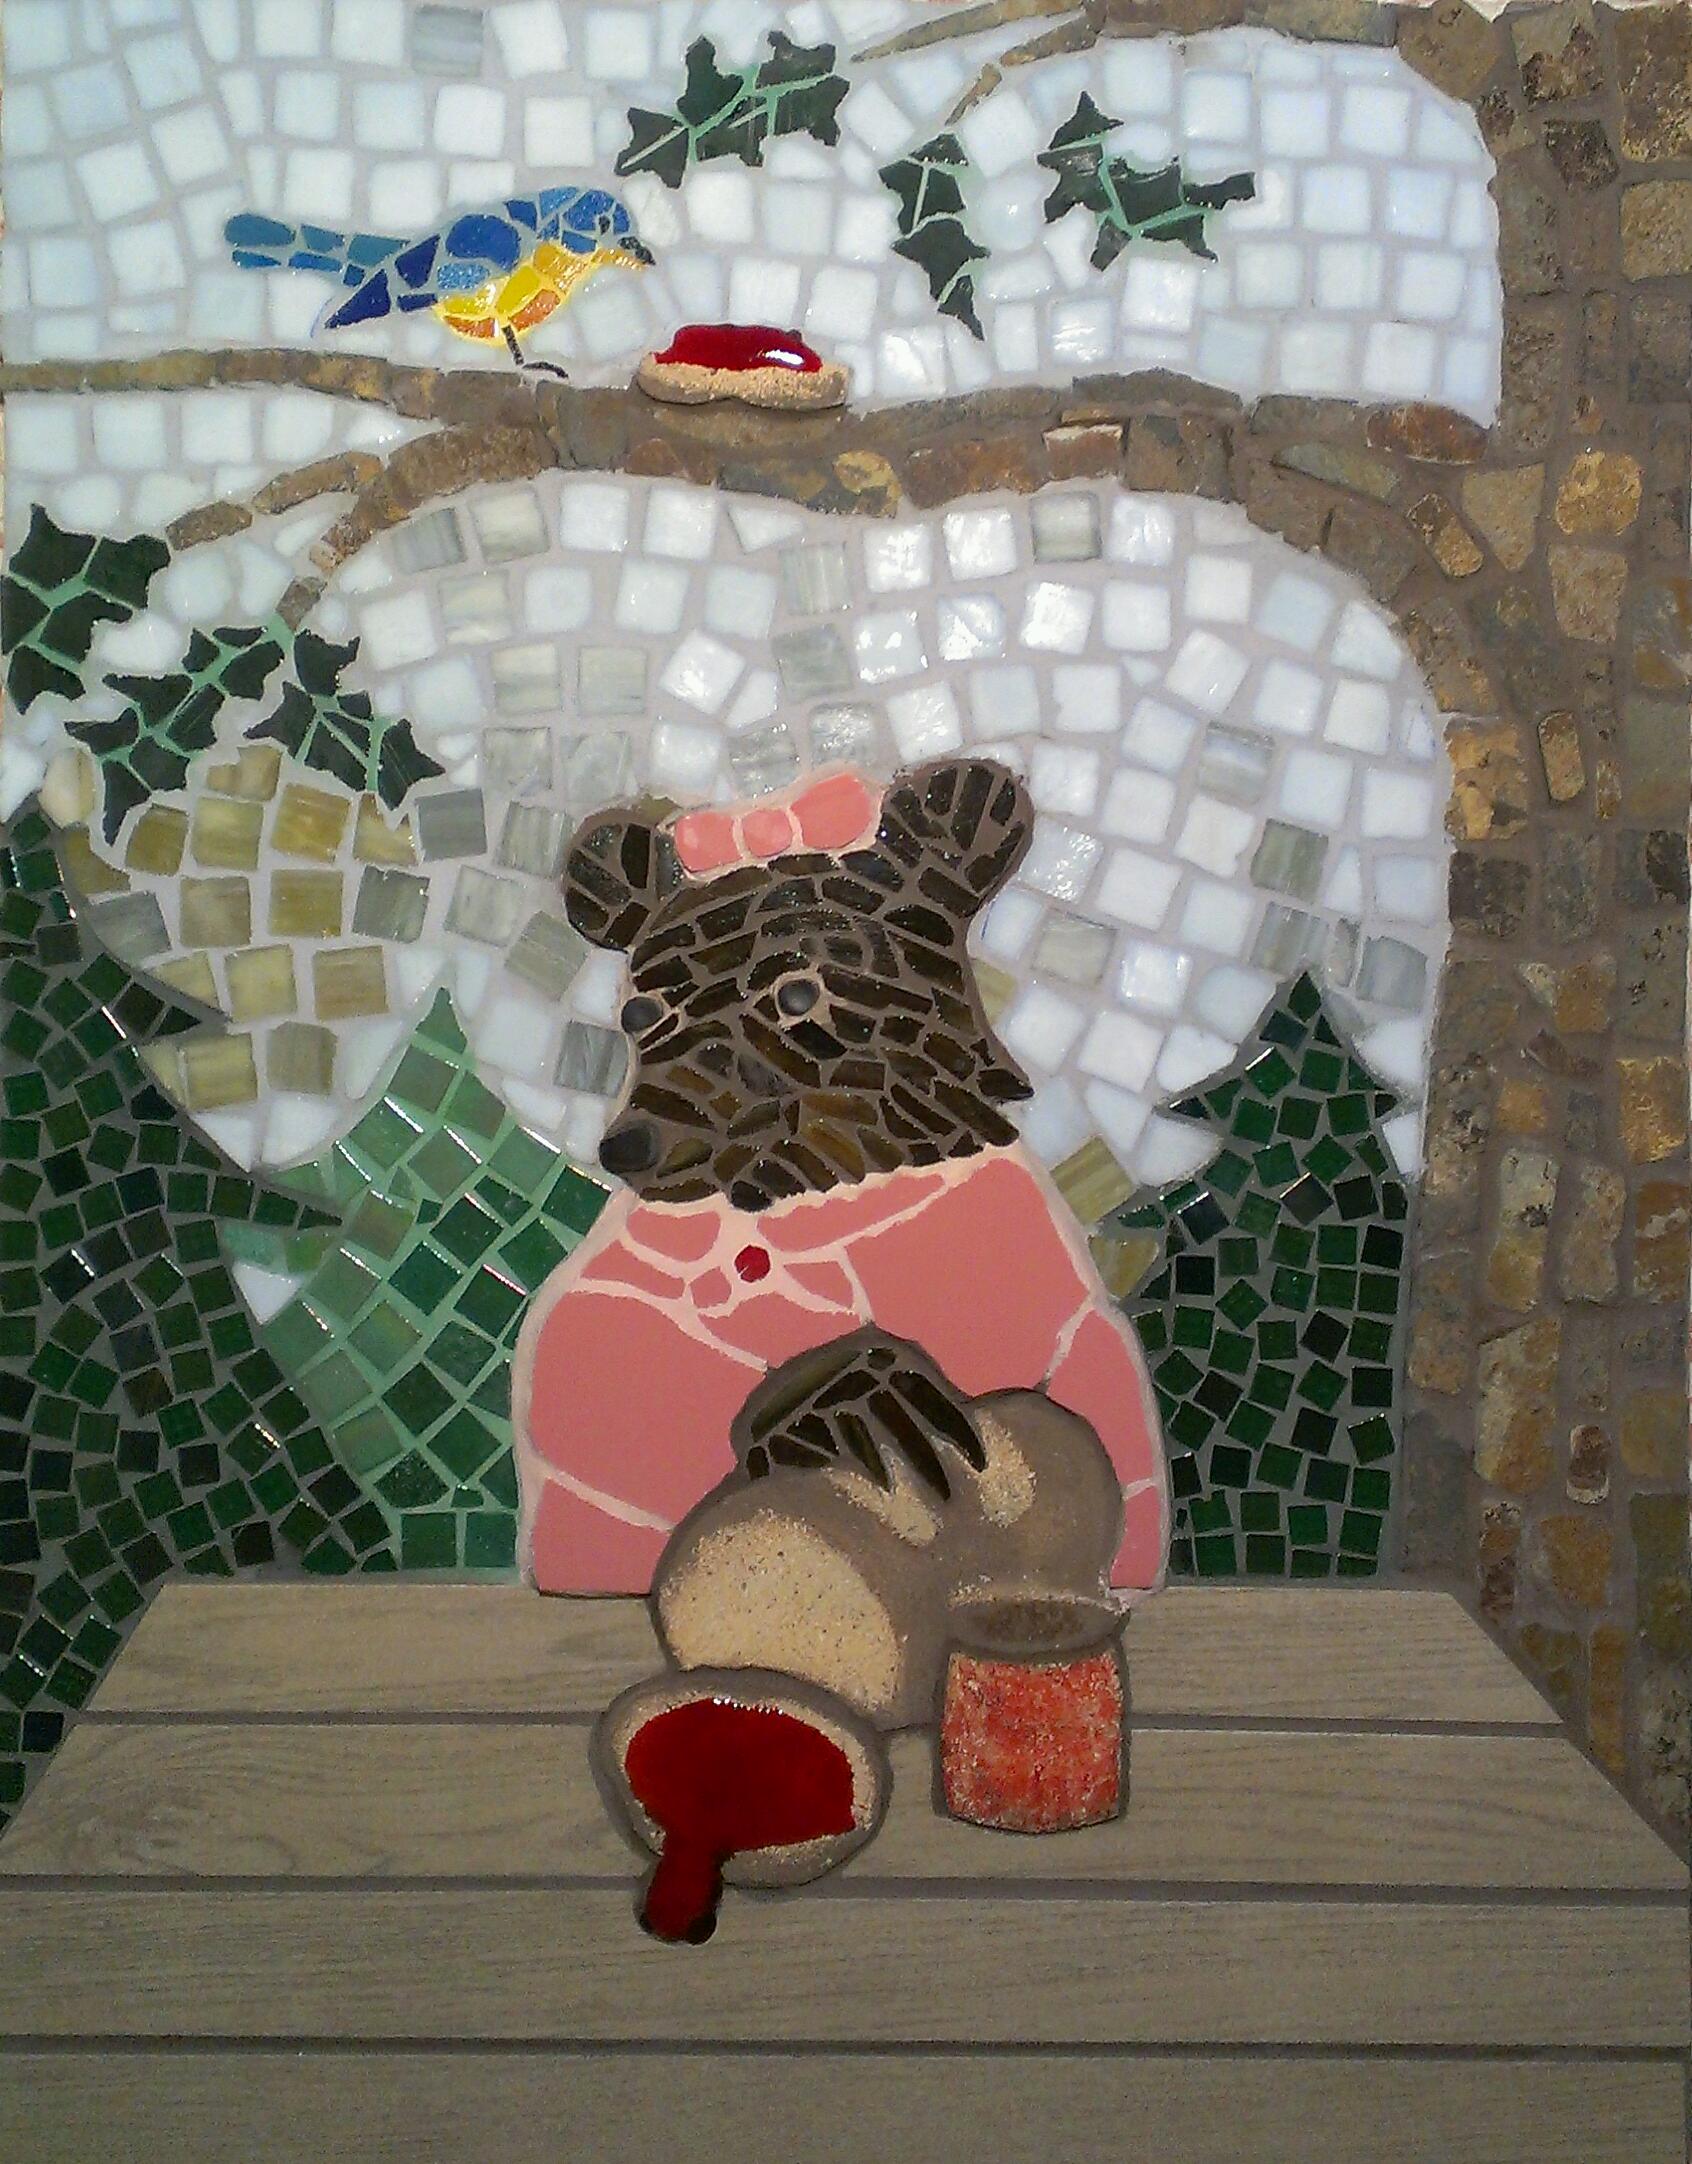 Tile Mural for PB&J at The Plant Chicago